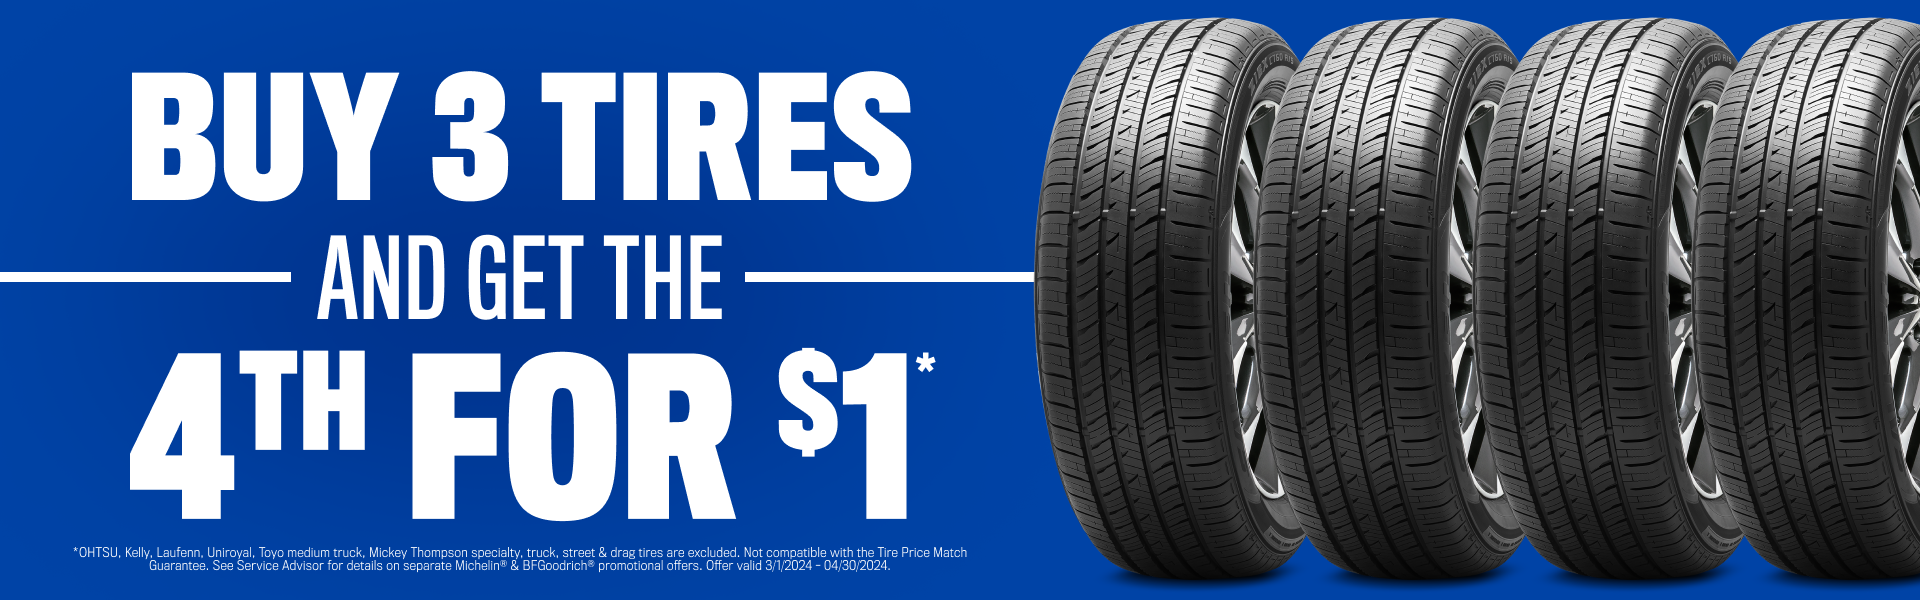 Buy 3 Tires and get the 4th